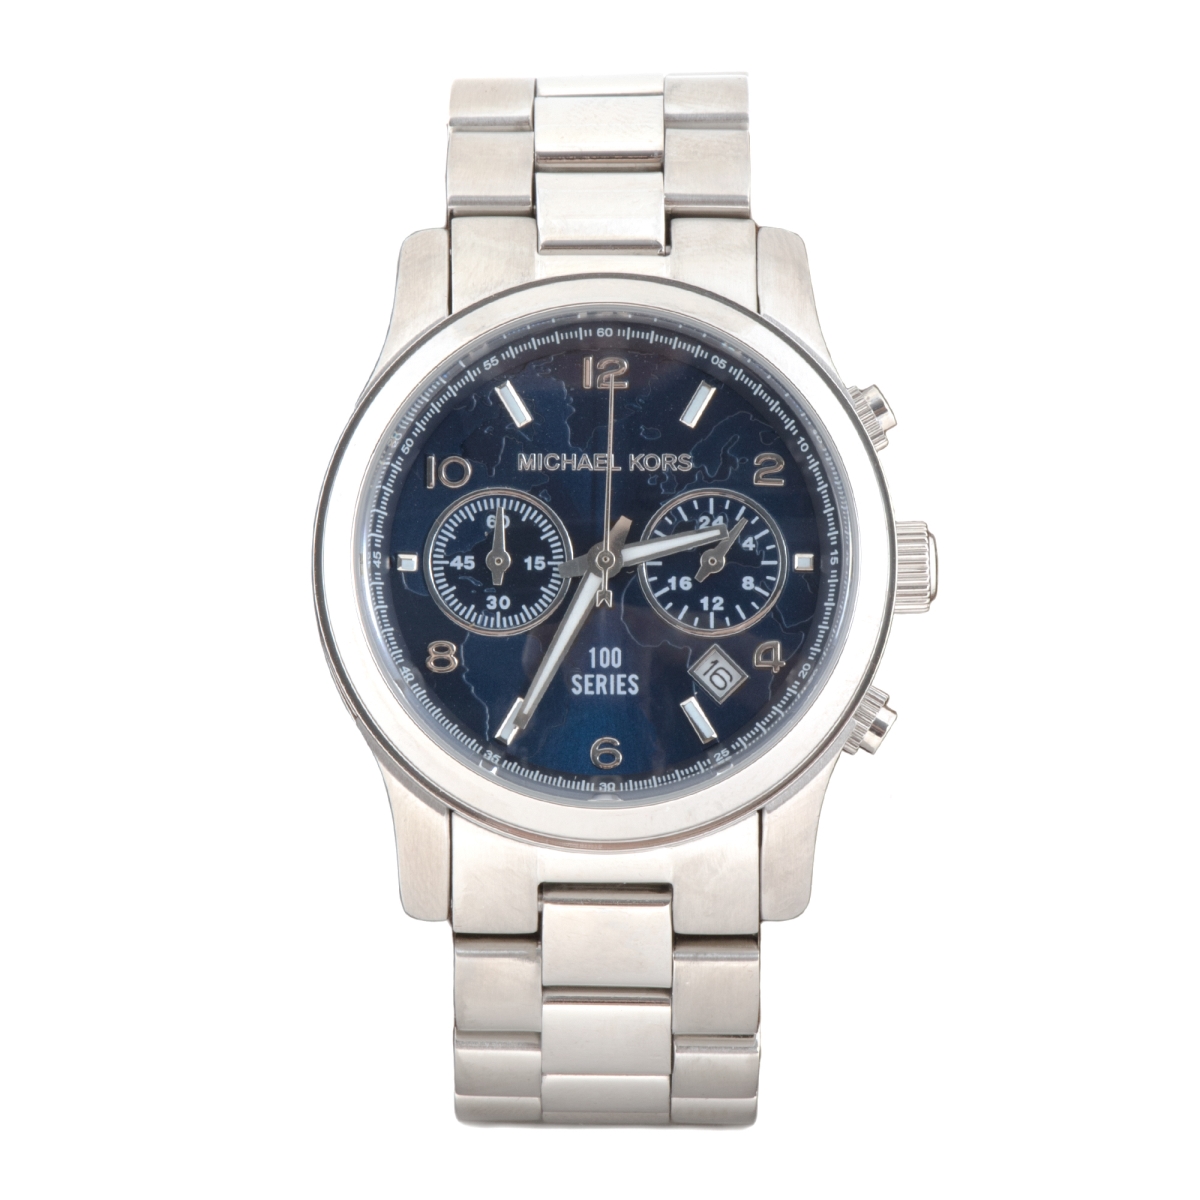 Mkors-watch-mk5814 Chronograph Hunger Stop Watch